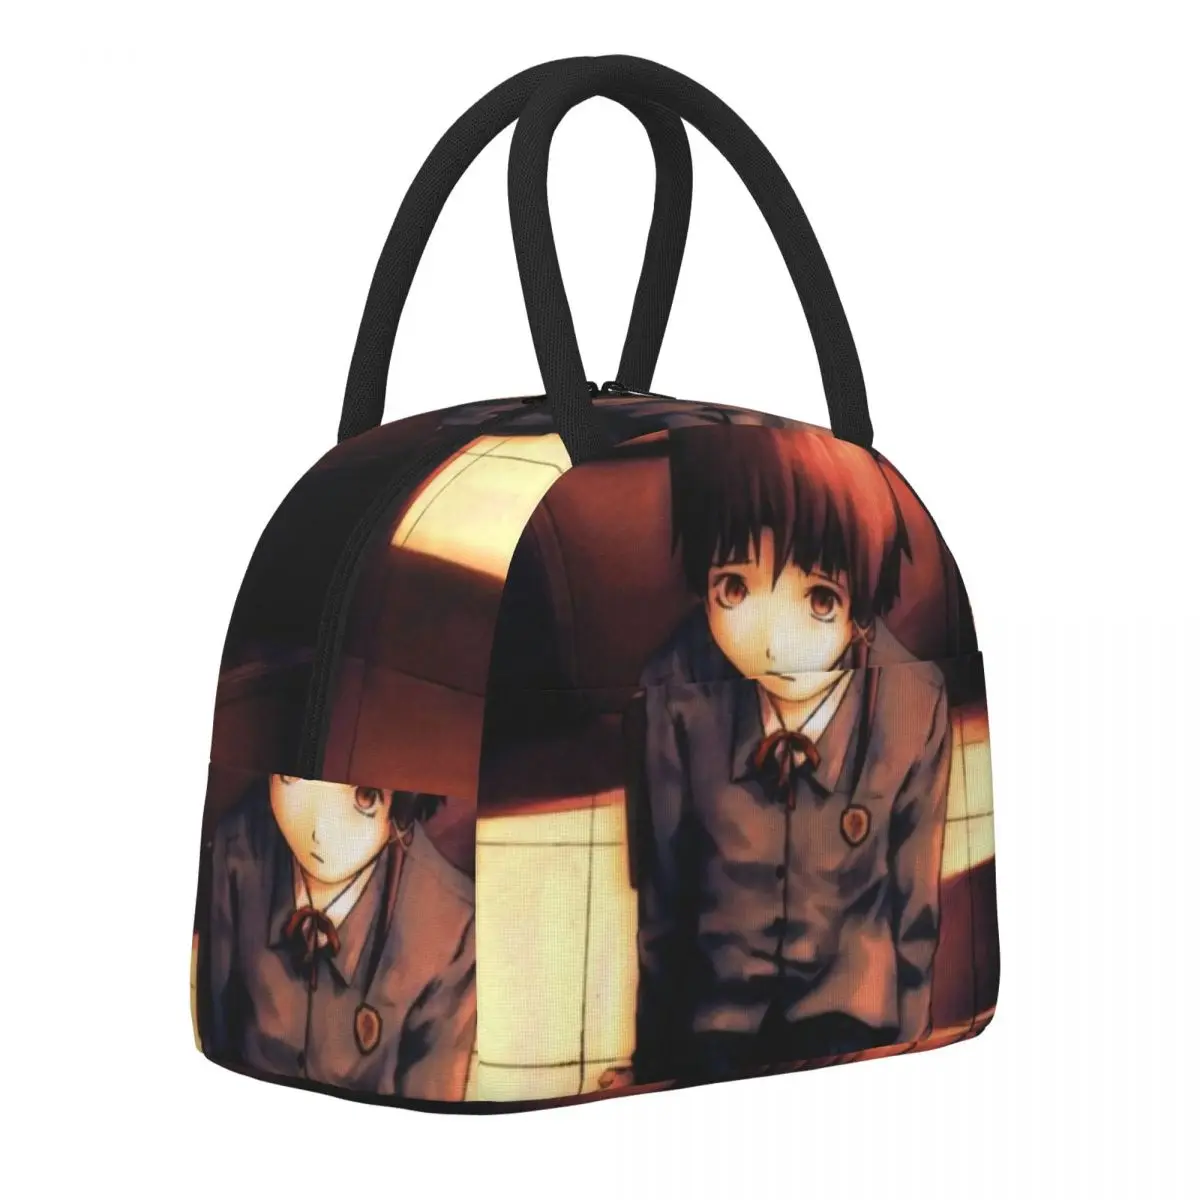 

Serial Experiments Lain Lunch Bag Anime Cute Lunch Box For Child Picnic Portable Cooler Bag Oxford Graphic Design Tote Food Bags